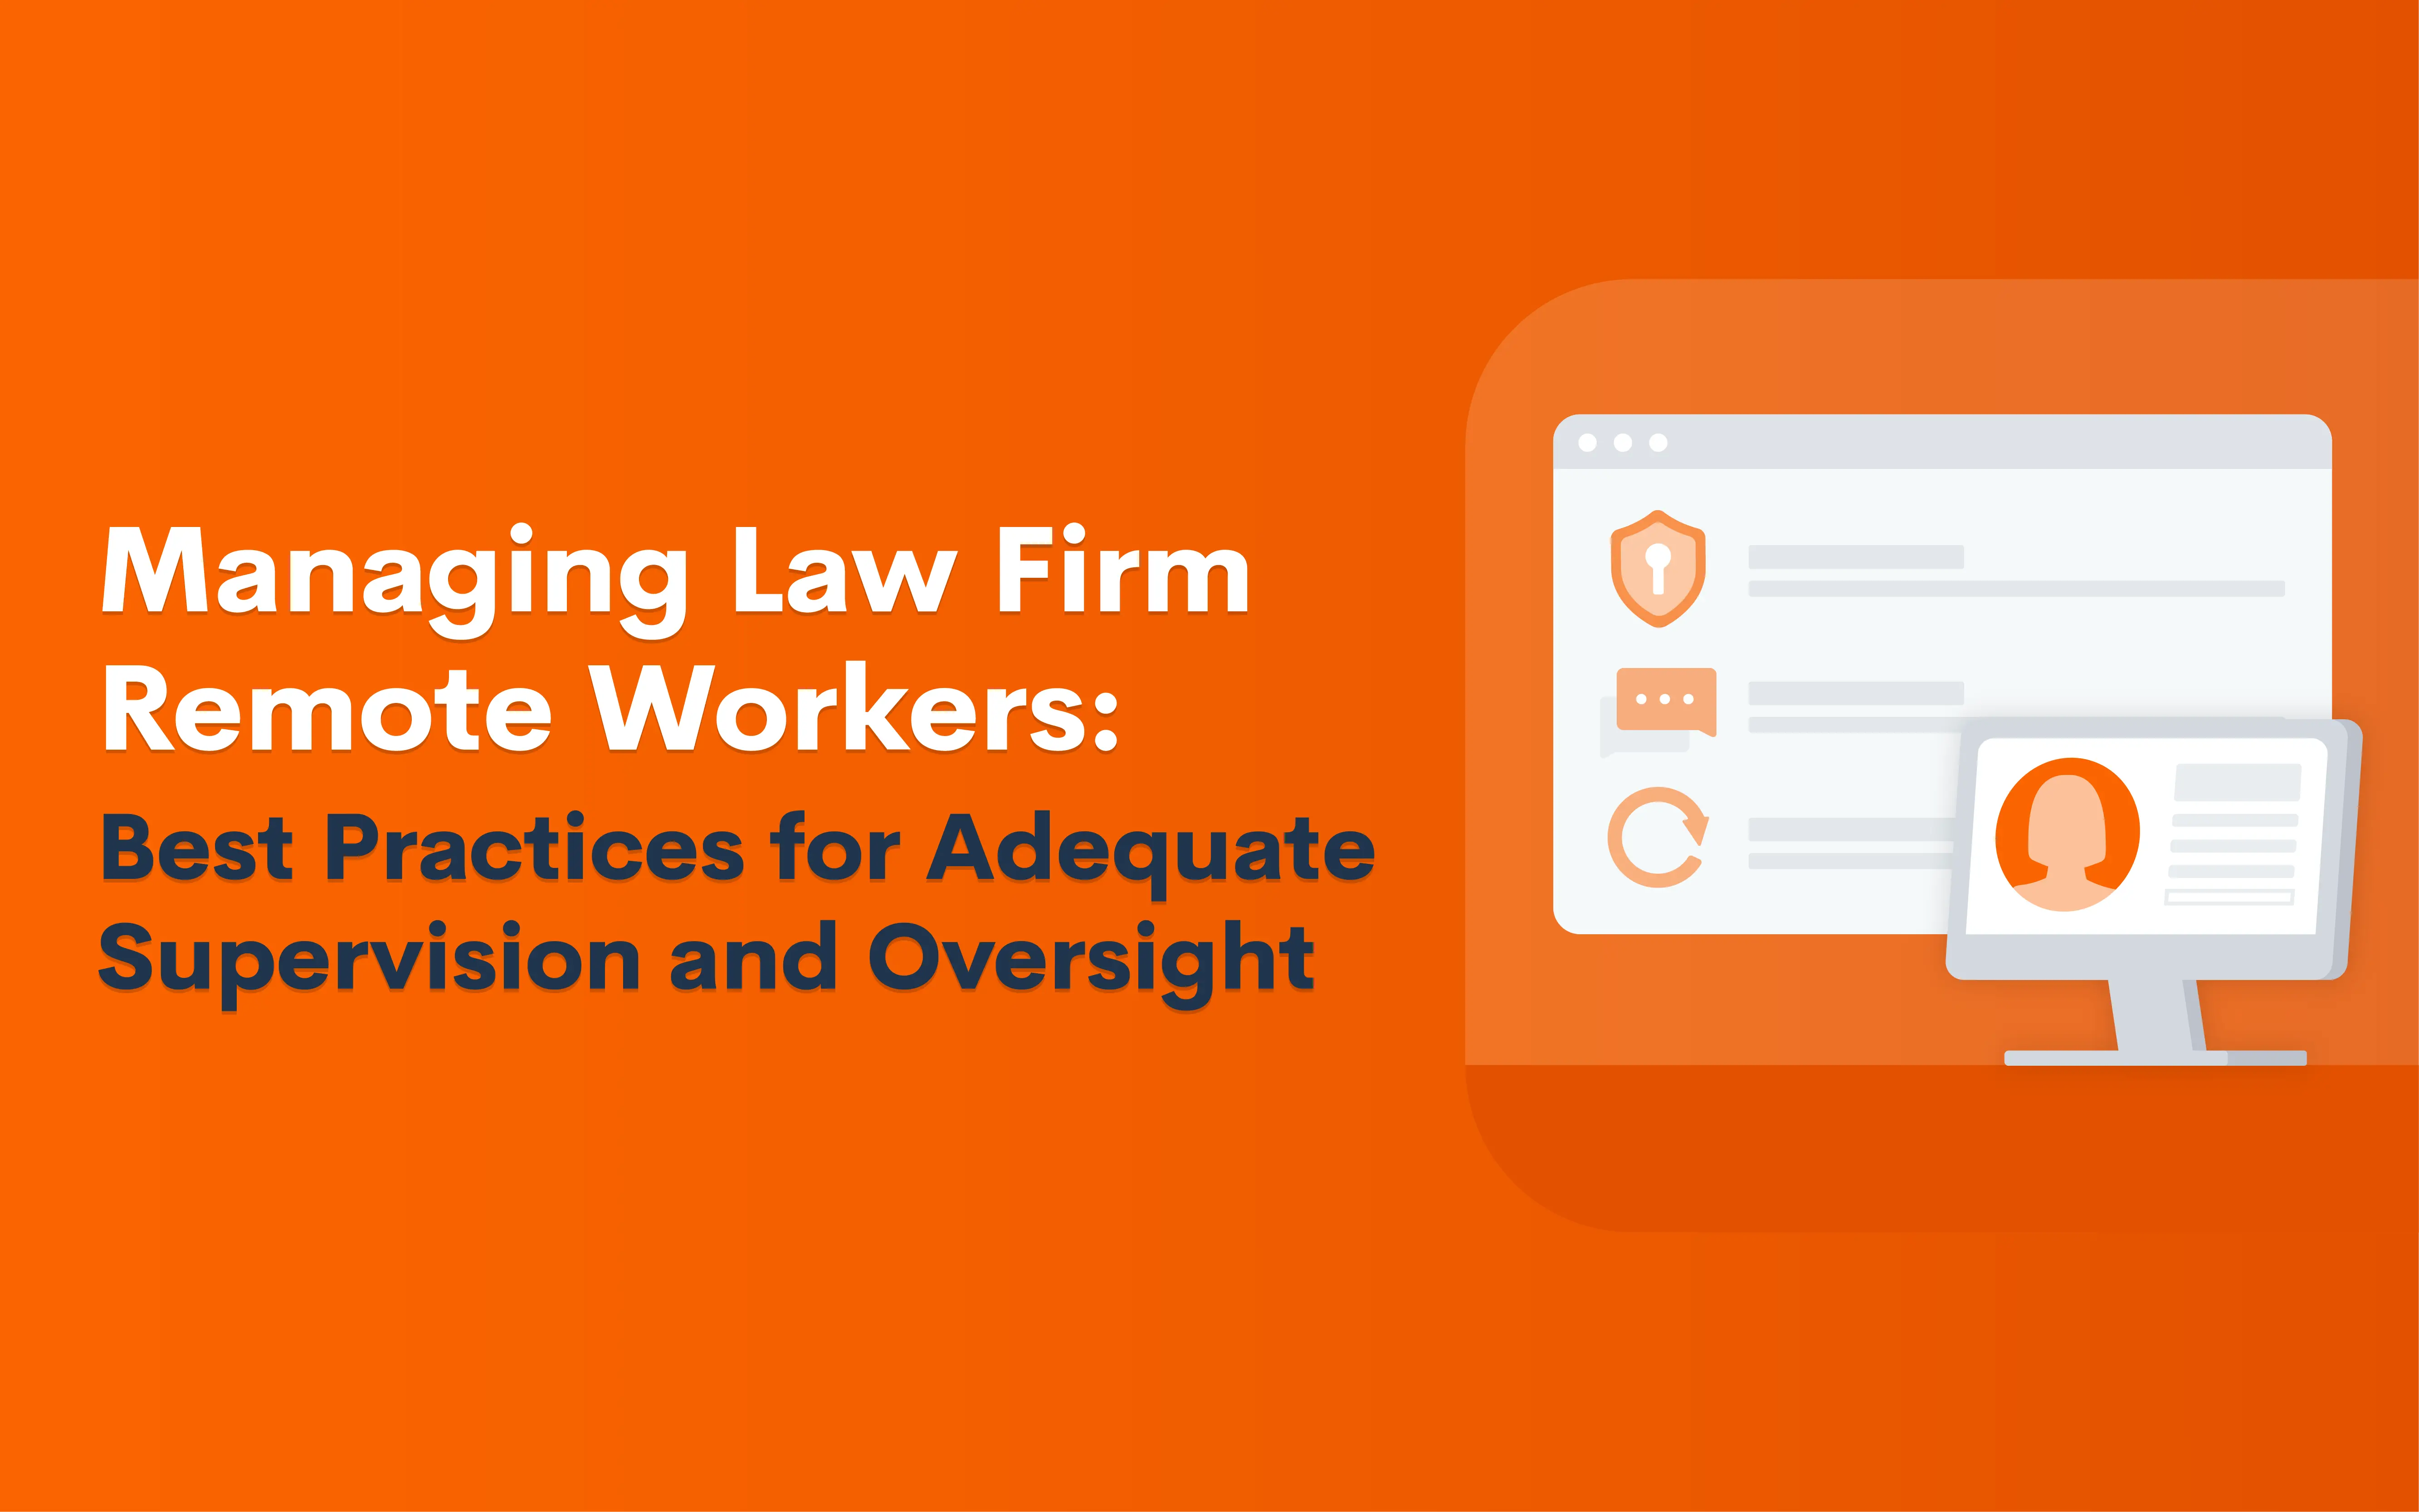 Managing Law Firm Remote Workers: Best Practices for Adequate Supervision and Oversight